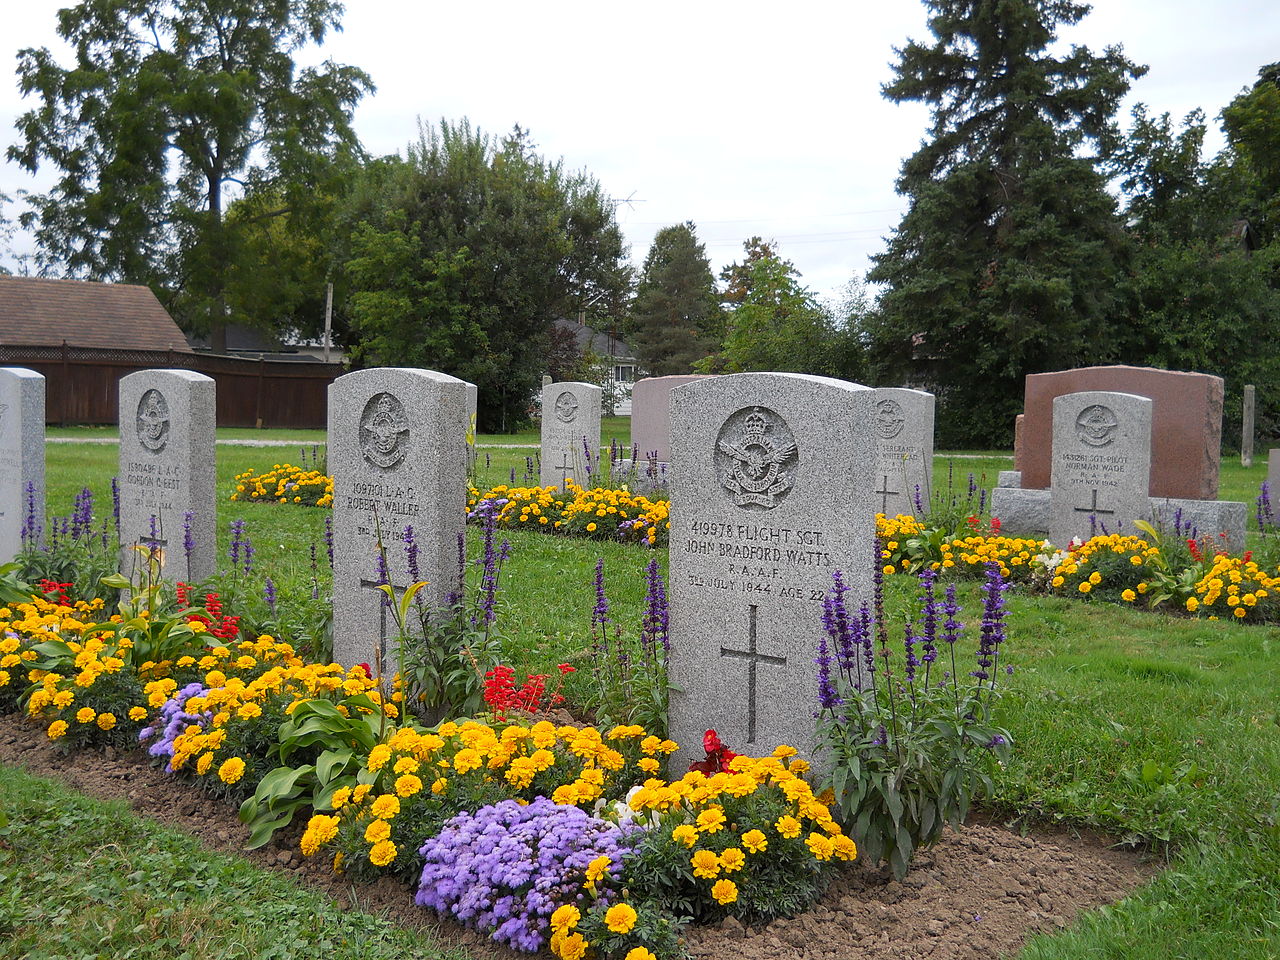 In the Knox Presbyterian Cemetery in Jarvis, Ontario, the final resting places of Australian, British and New Zealand candidates who were killed during training at No. 1 Bombing and Gunnery School at RCAF Jarvis are tended by the Commonwealth War Graves Commission. PHOTO: J. S. Bond